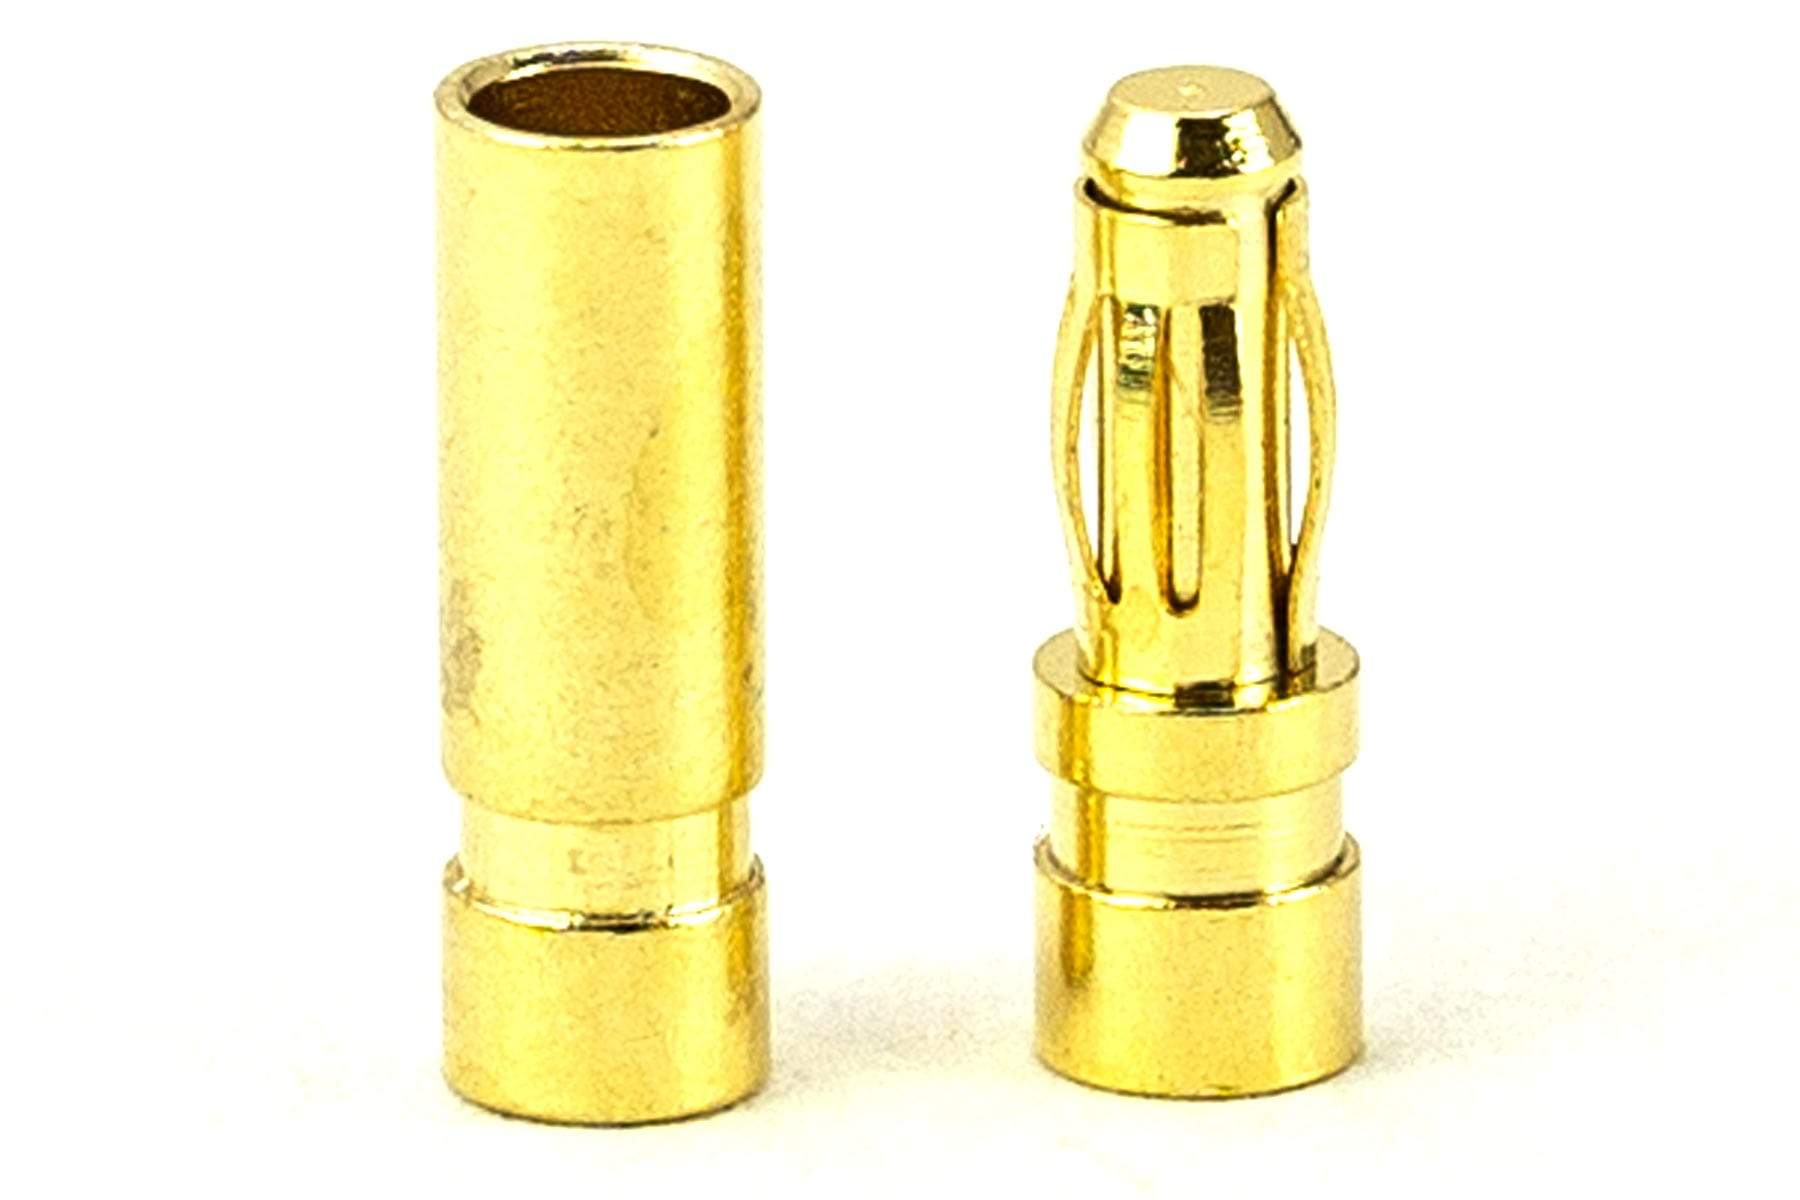 BenchCraft 2.5mm Gold Bullet ESC and Motor Connectors (Pair) BCT5062-021